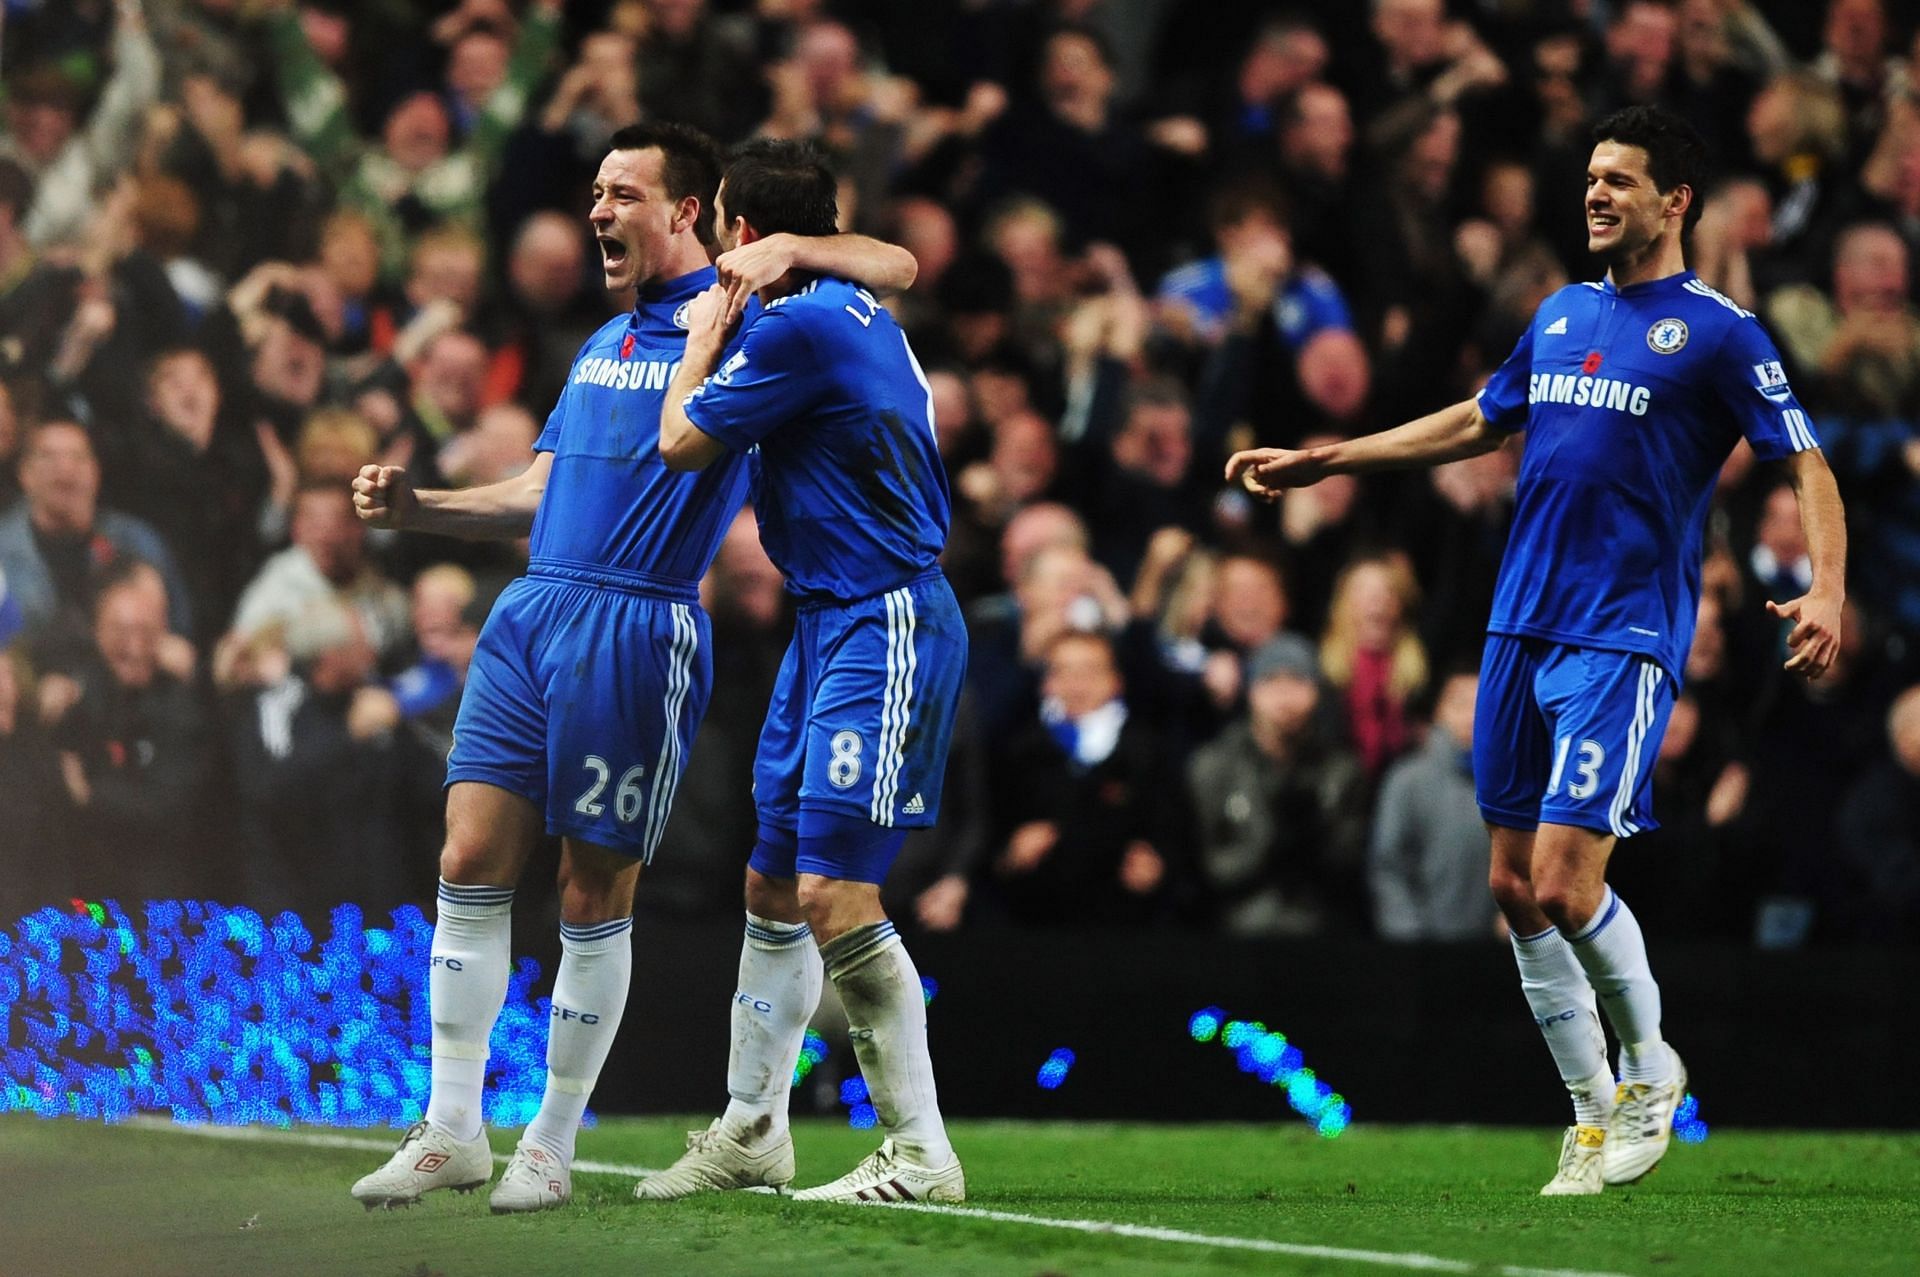 Chelsea became the first side to score 100 goals in a season in EPL